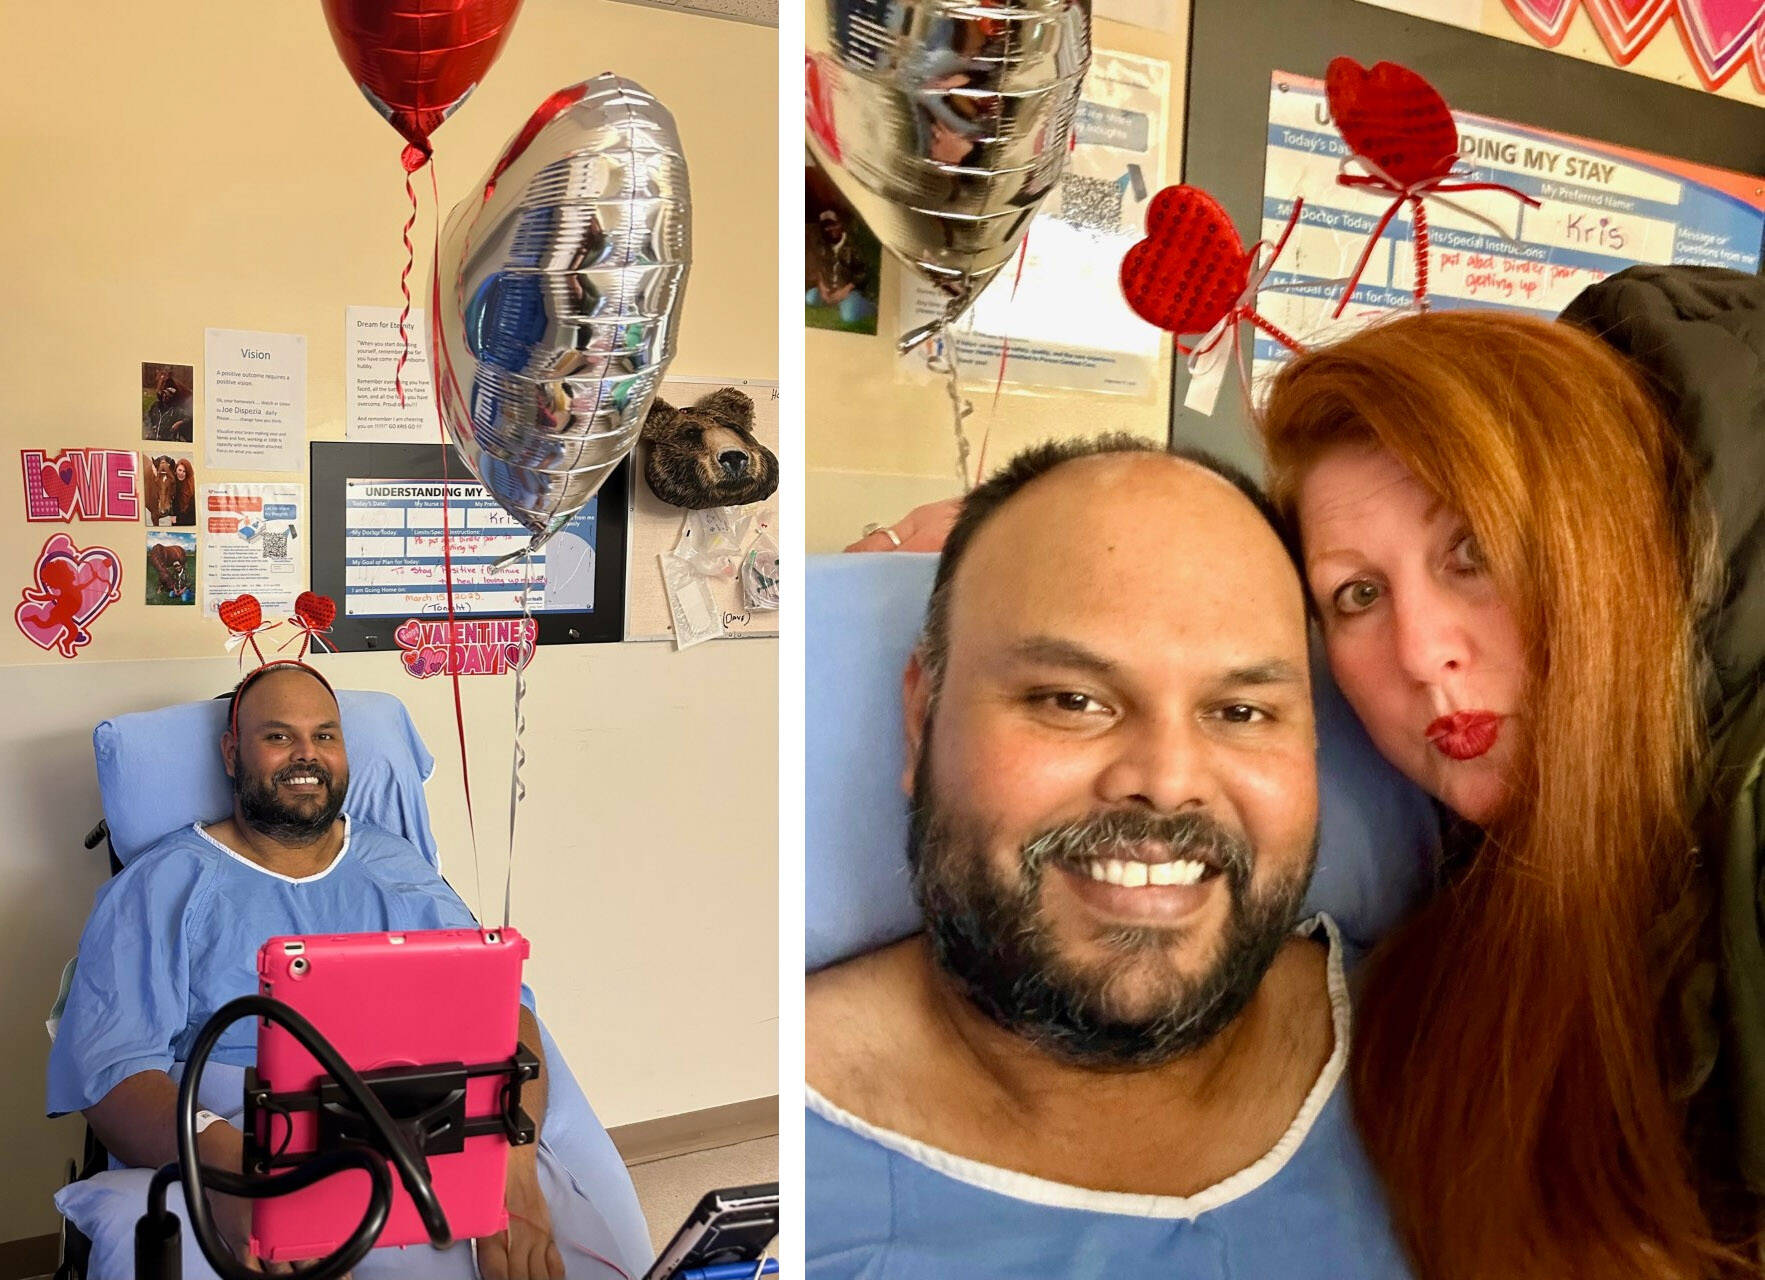 Kris Mallisetty, seen here with wife Leah Gray, was paralyzed from the neck down during surgery on his spine on Jan. 27. Because he doesnt qualify for Persons With Disability funding, a friend has set up a fundraiser to help pay for the costs of making his home wheelchair-accessible. Gray has been visiting him every day and decorated his room for Valentines Day. (Leah Gray photo)